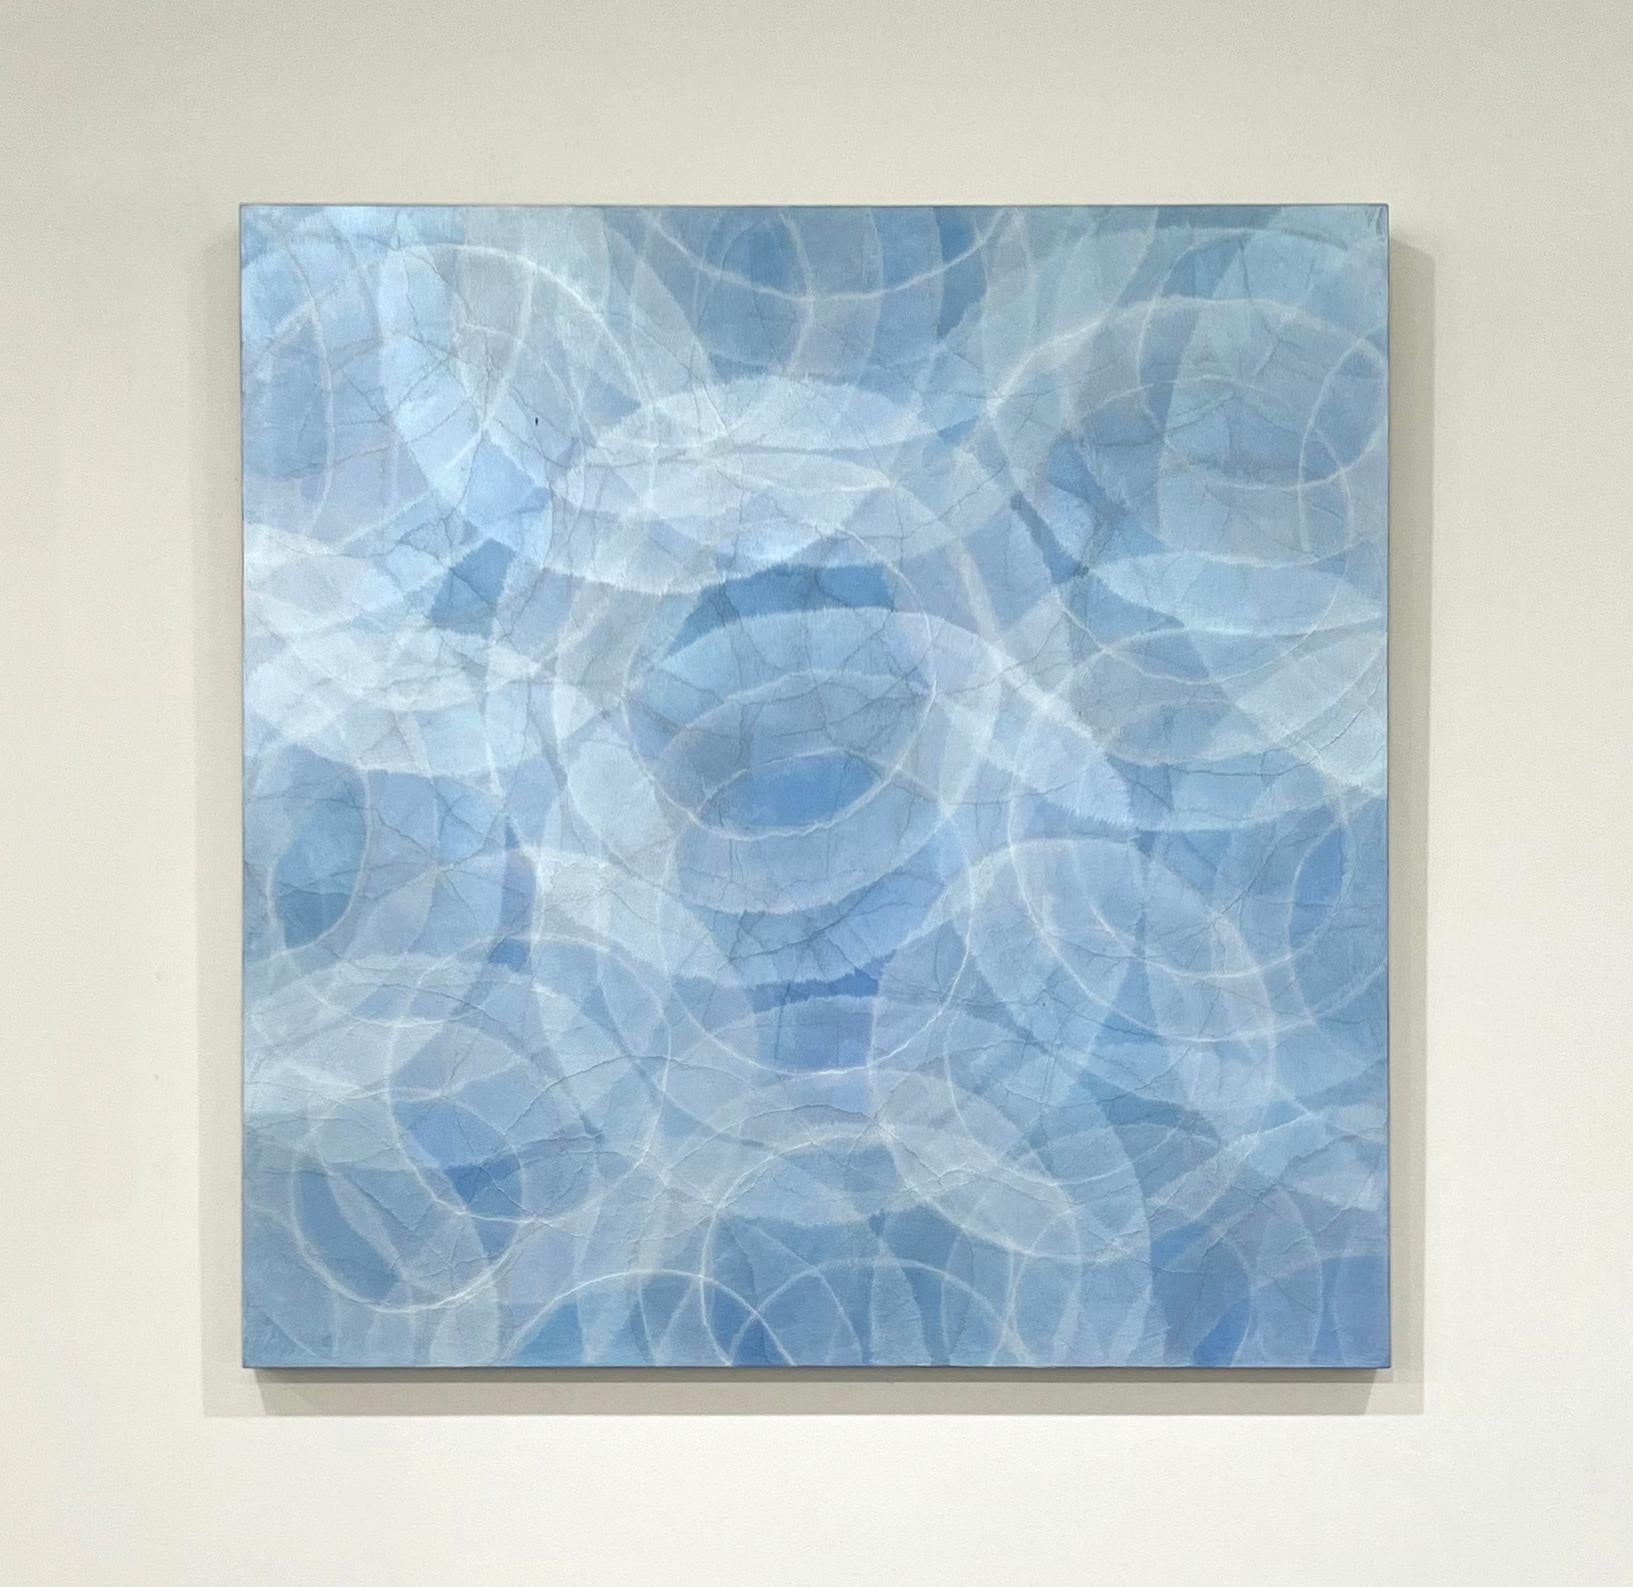 This abstract painting by Roger Mudre is made with acrylic paint over mica powder on cradled birch panel. It features a light blue and silver palette, with the light outlines of circles which almost appear to glow overlapping one another throughout